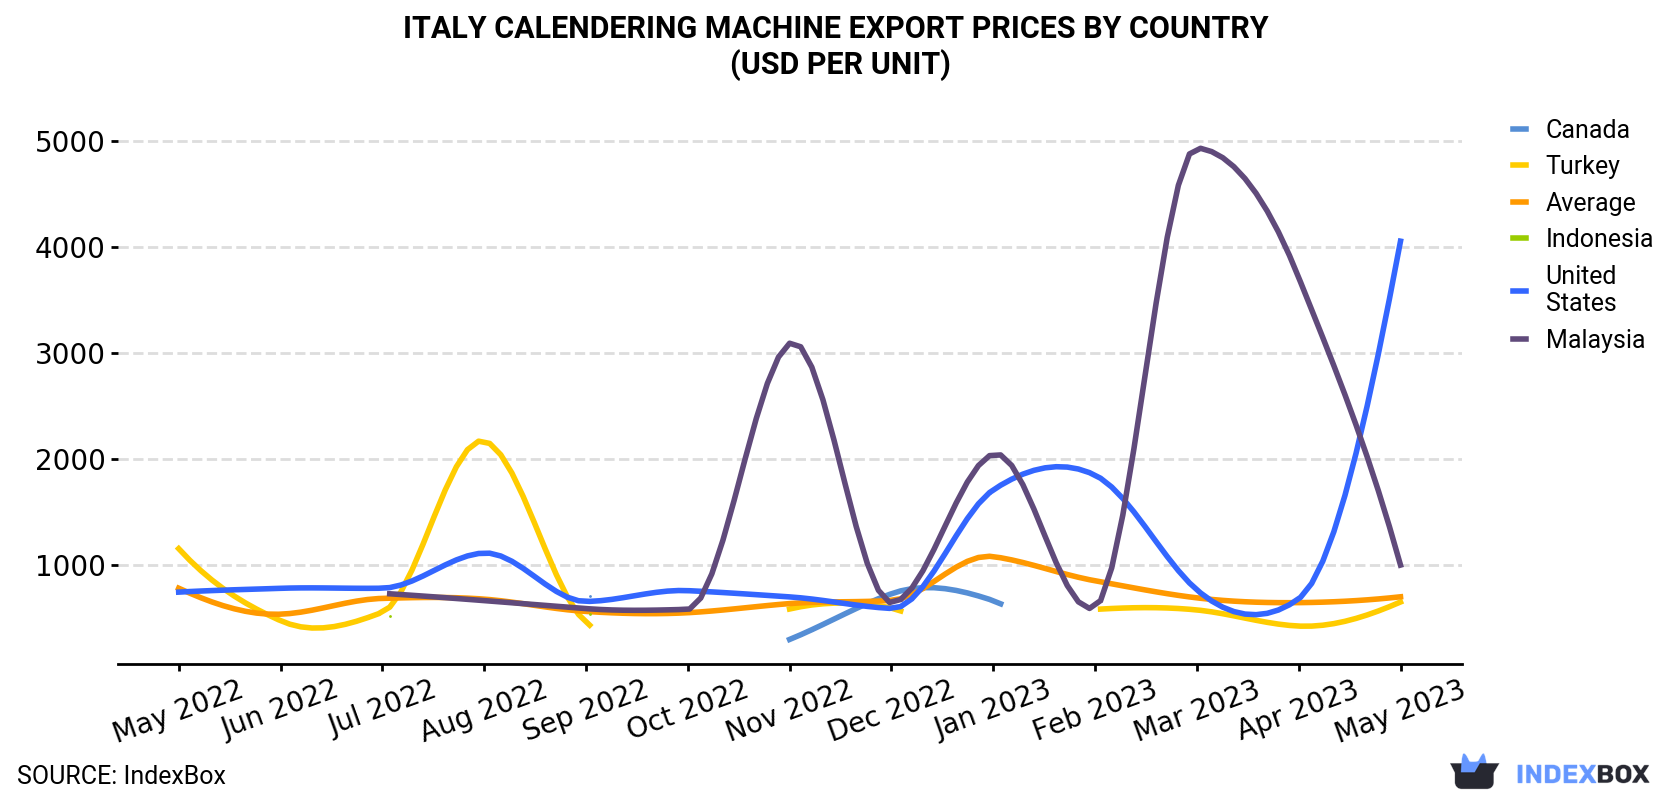 Italy Calendering Machine Export Prices By Country (USD Per Unit)